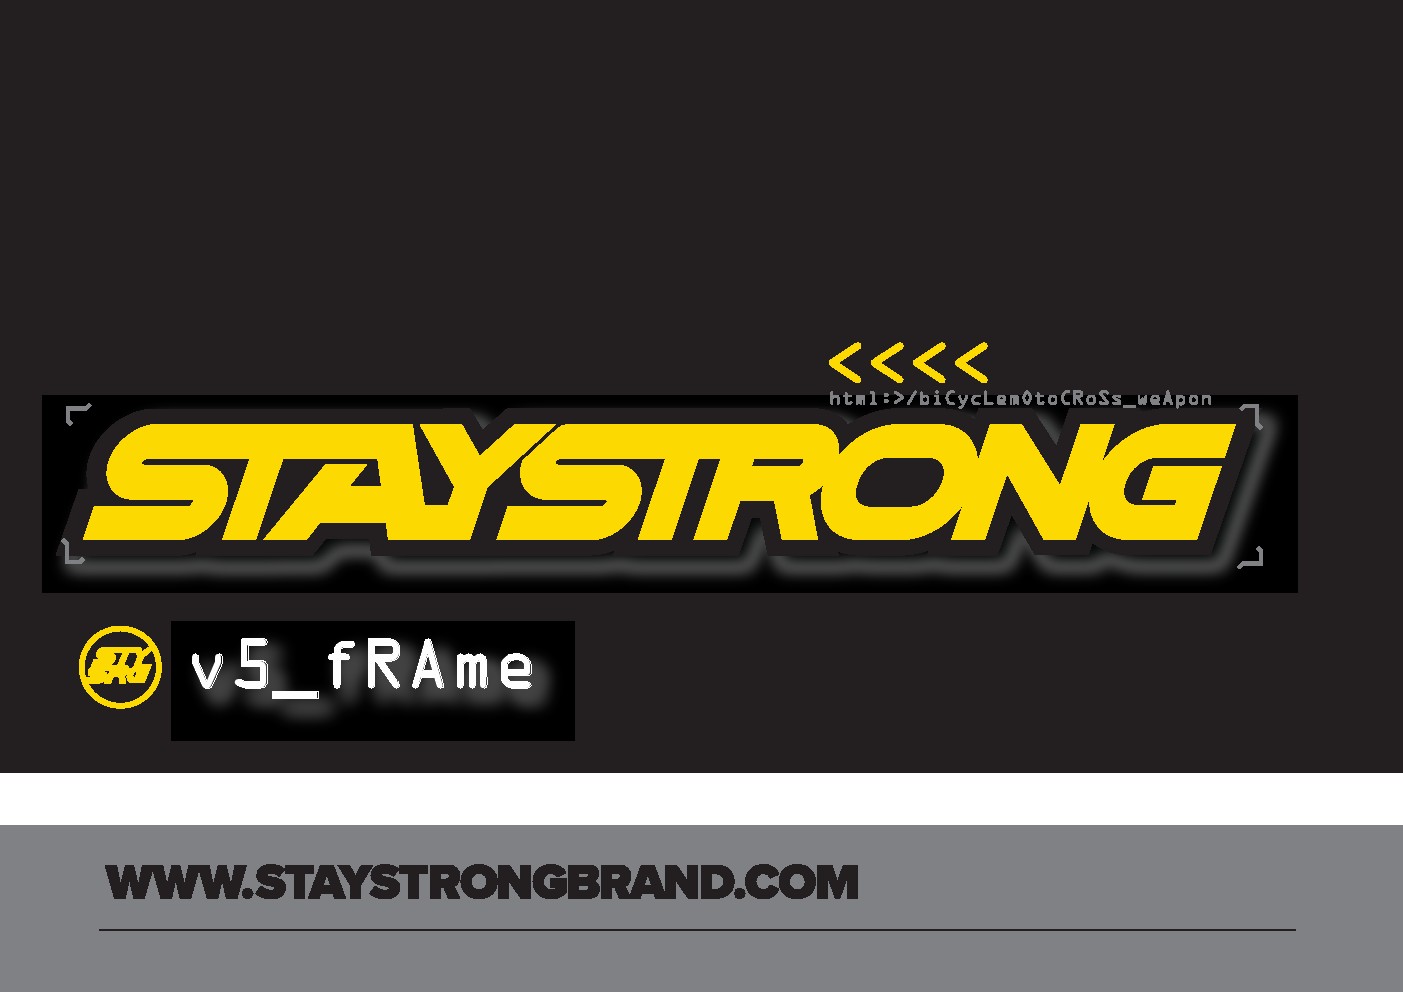 ALL NEW STAY STRONG V5 FRAME COMING !